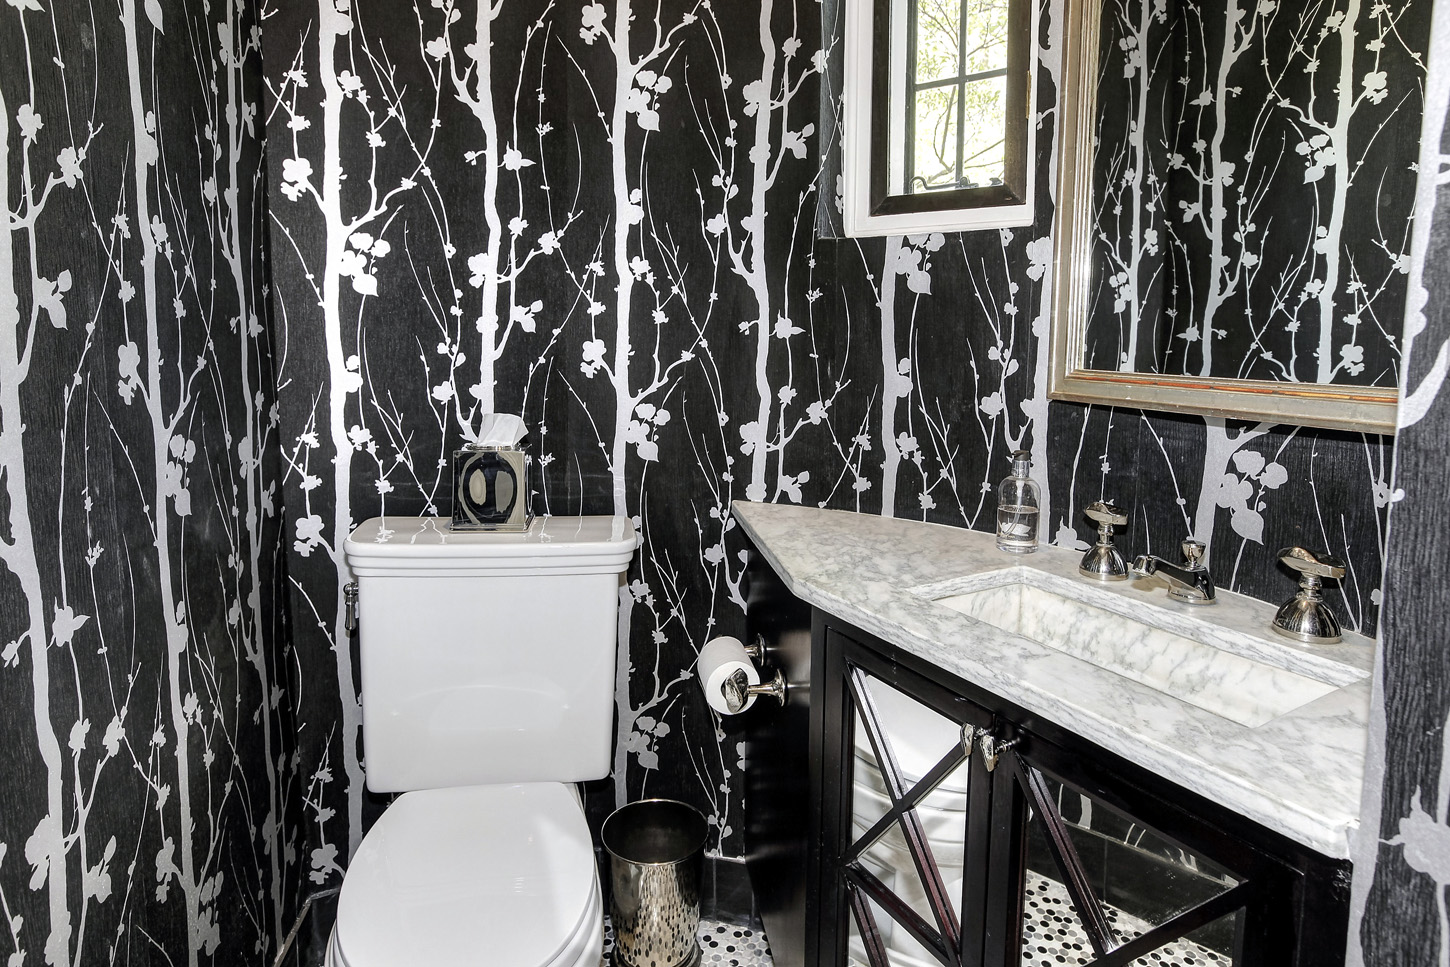 The powder room of the Obamas' new house, in the Kalorama area of Northwest D.C. (Courtesy McFadden Group)